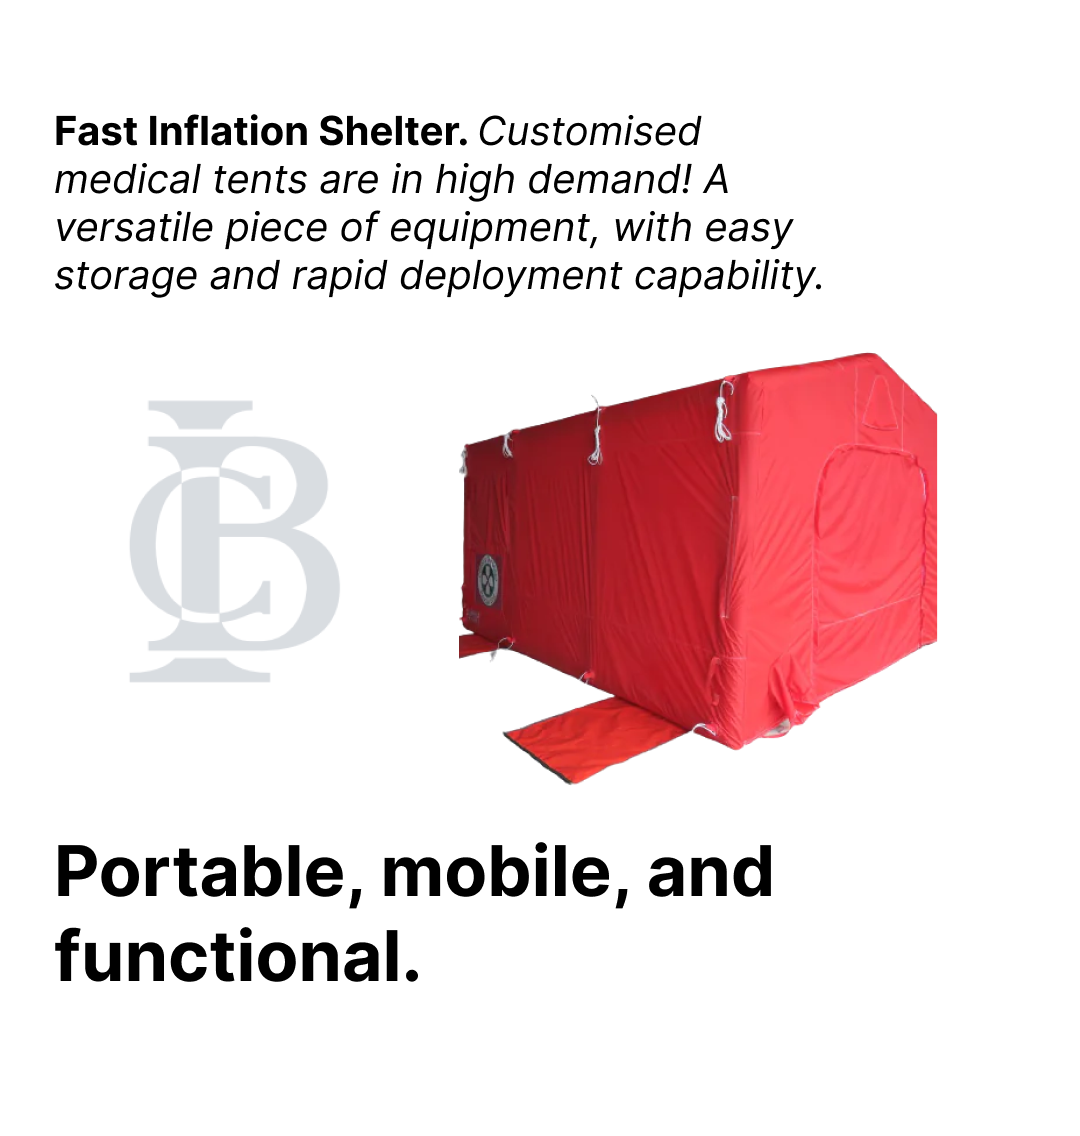 Fast Inflation Shelter Series: 'Pop Up' Medical Tents